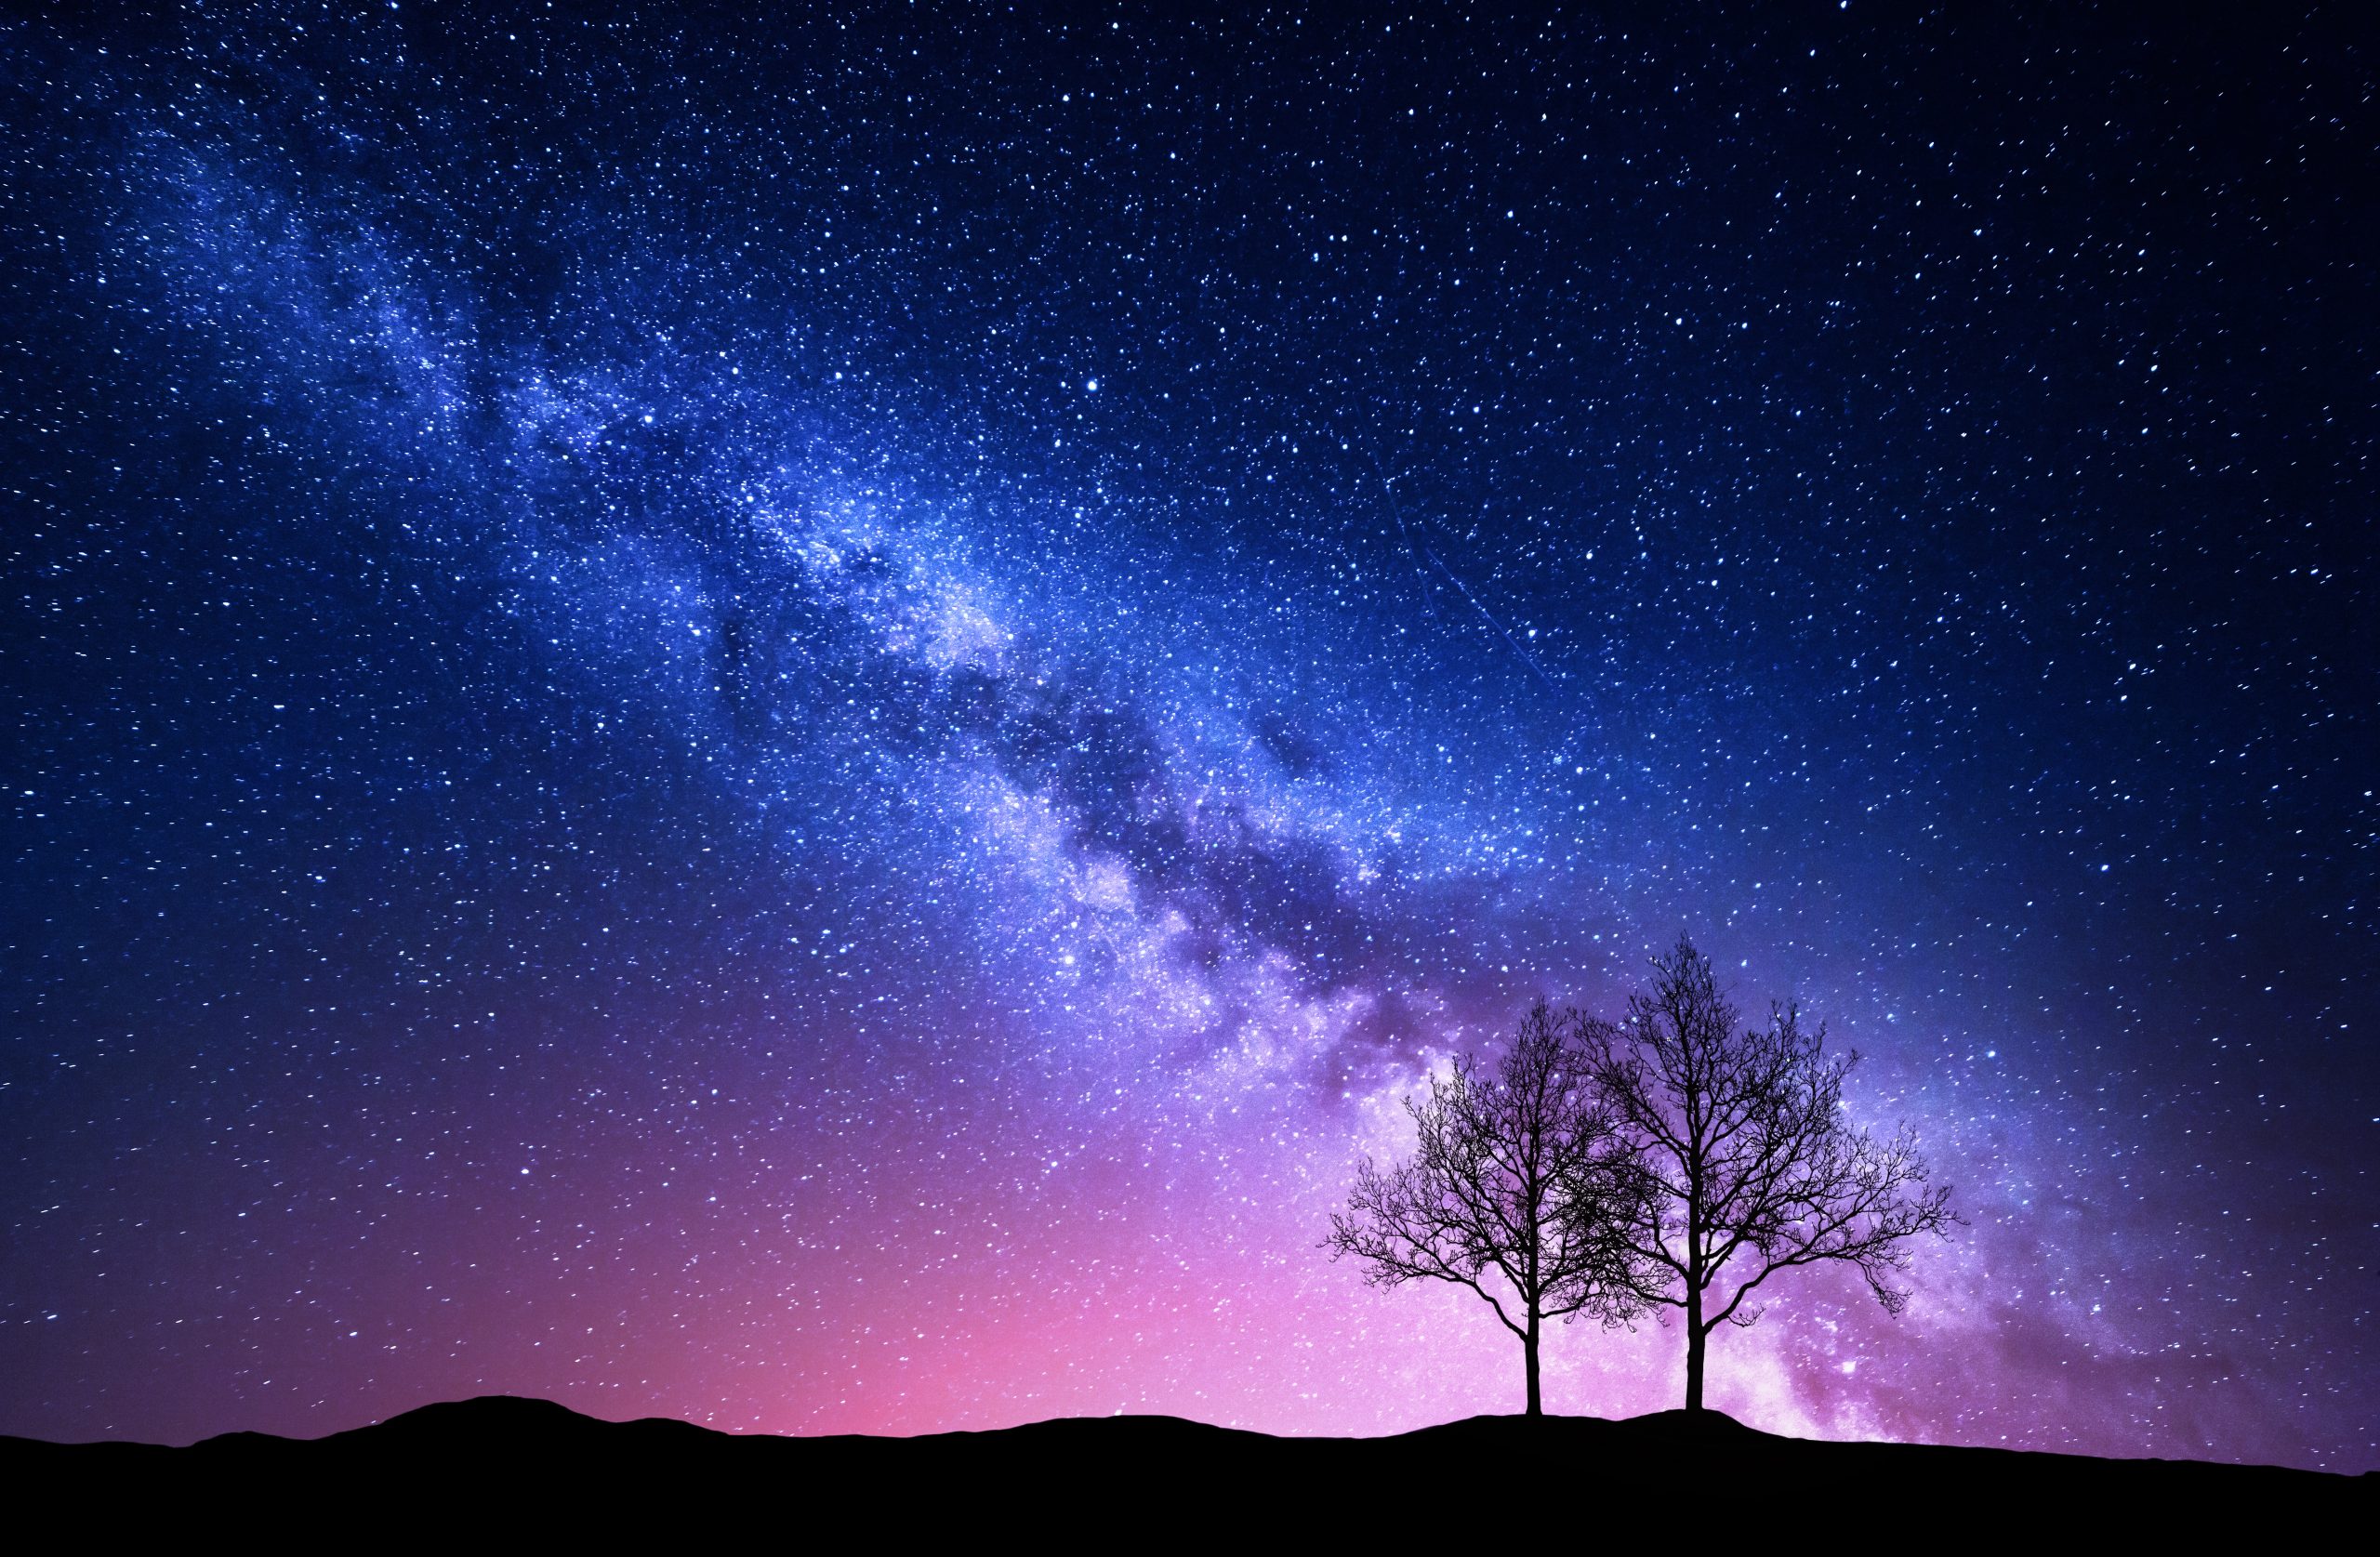 Starry sky with pink Milky Way and trees. Night landscape – Enlightened